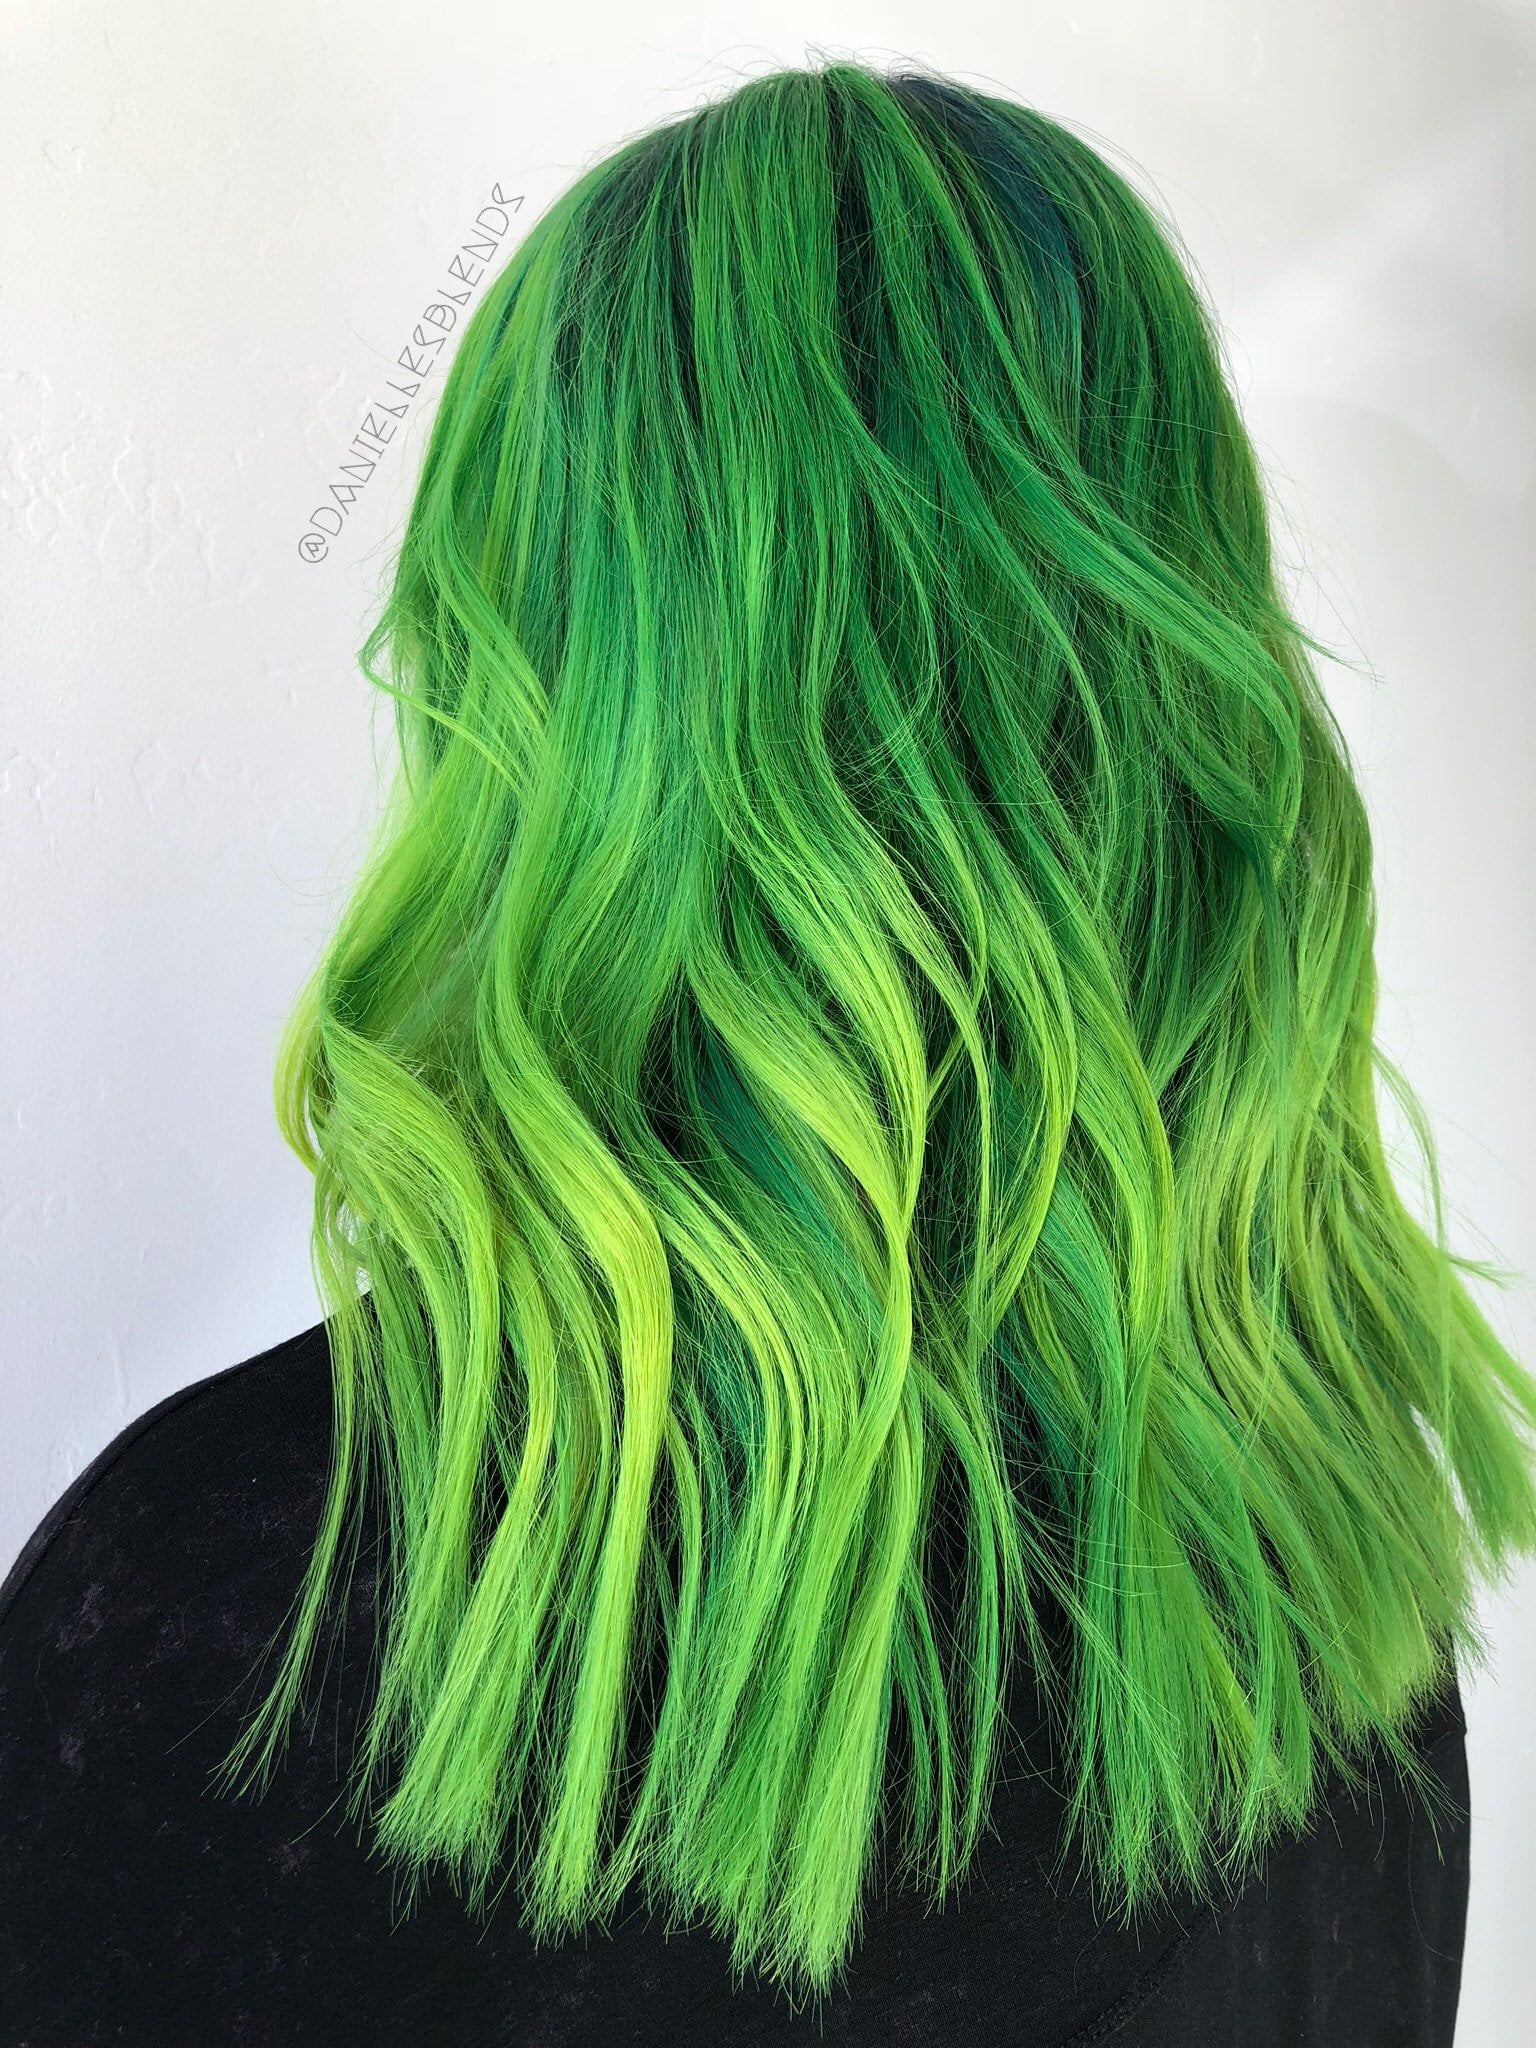 Hair in a bright lime green shade